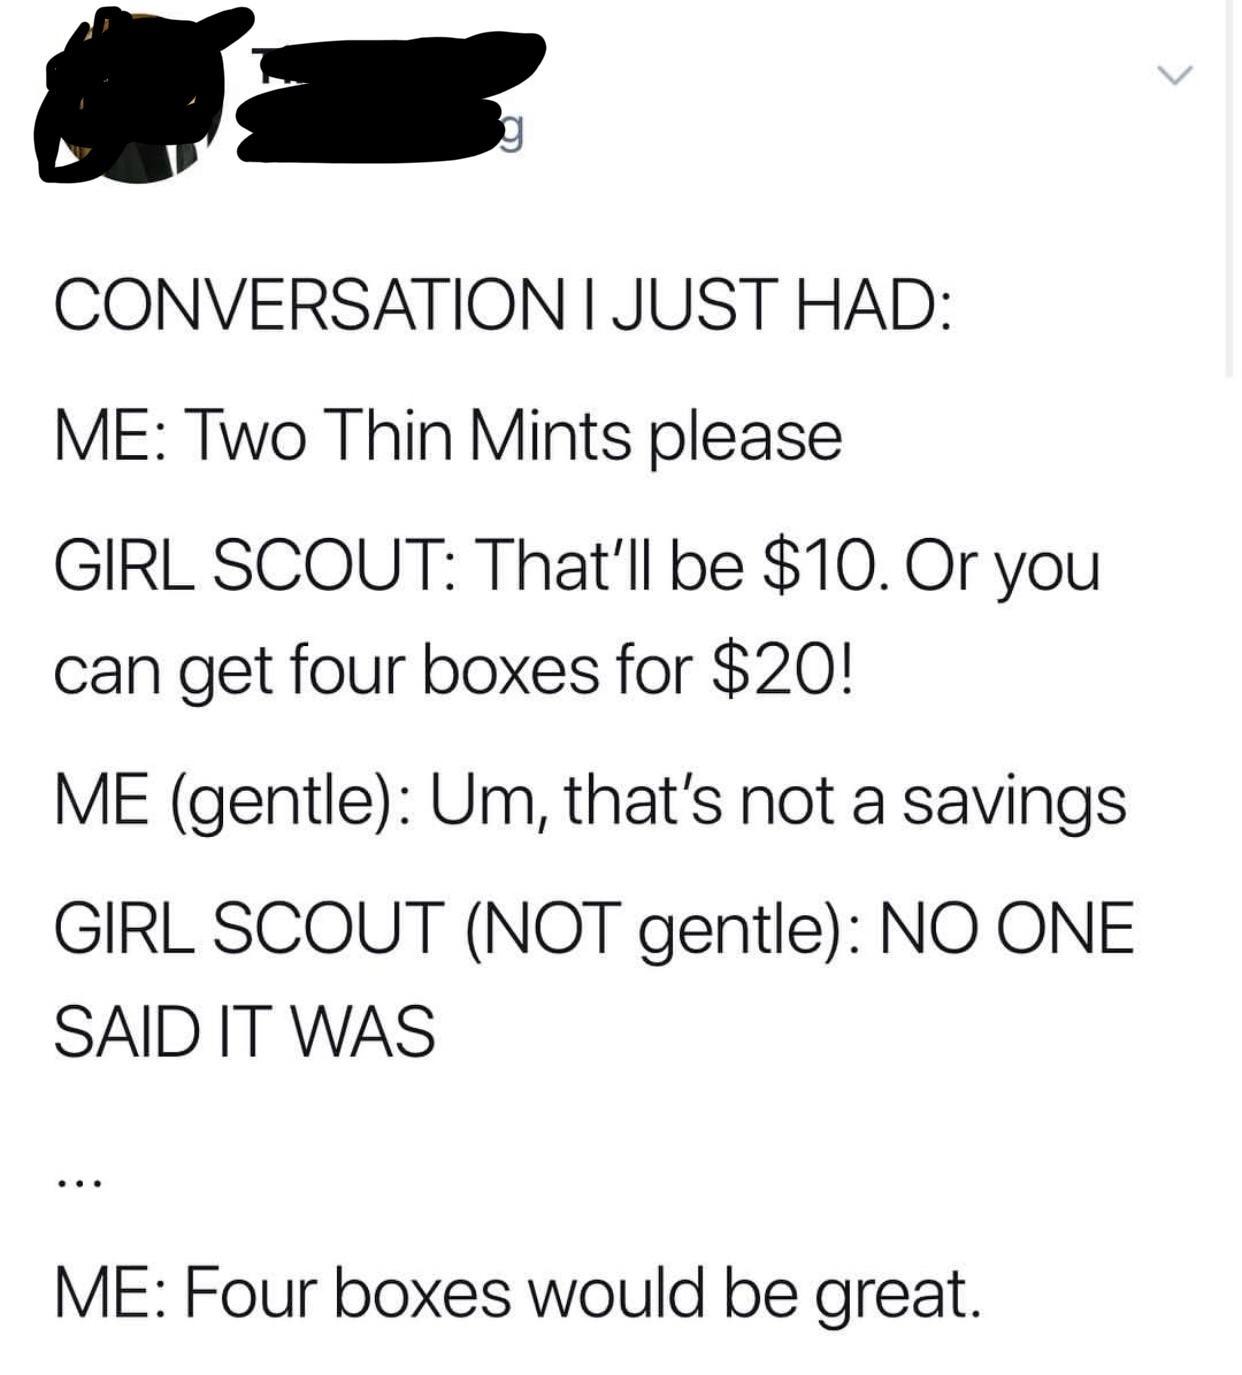 you re looking for in a partner - Conversation I Just Had Me Two Thin Mints please Girl Scout That'll be $10. Or you can get four boxes for $20! Me gentle Um, that's not a savings Girl Scout Not gentle No One Said It Was Me Four boxes would be great.